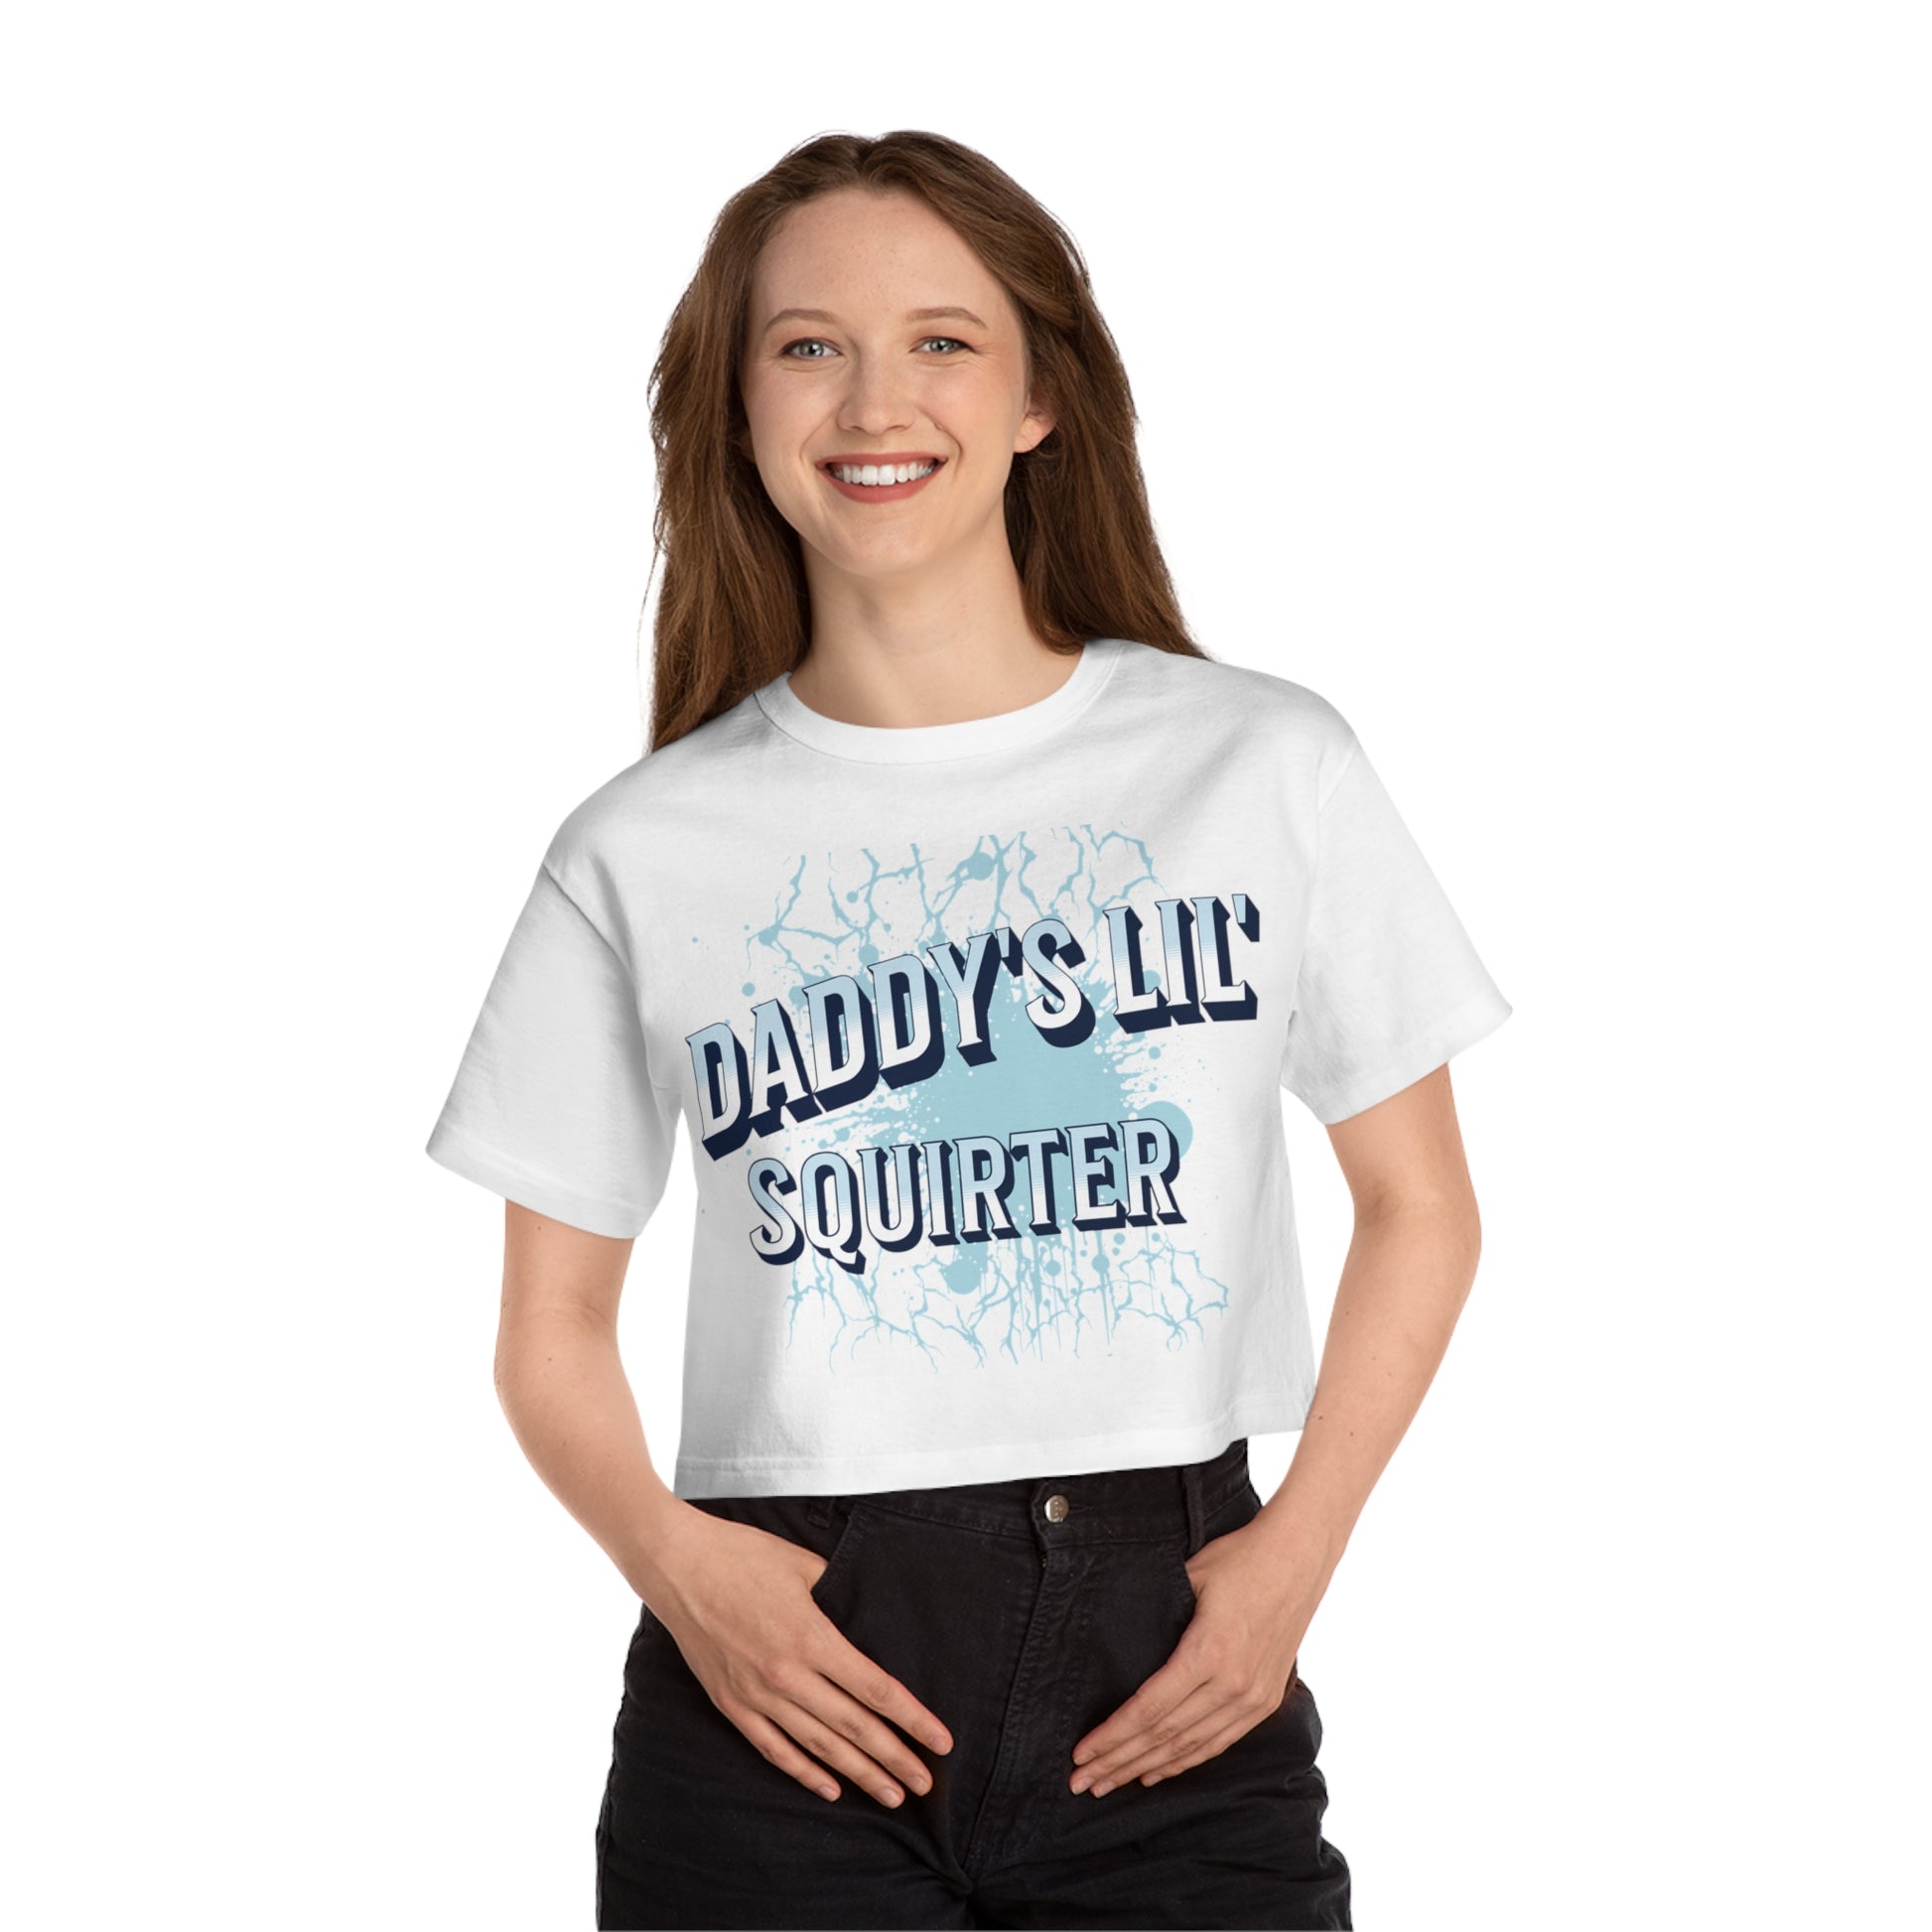 Juucie Women's Daddy's Lil' Squirter Cropped T-Shirt - Juucie